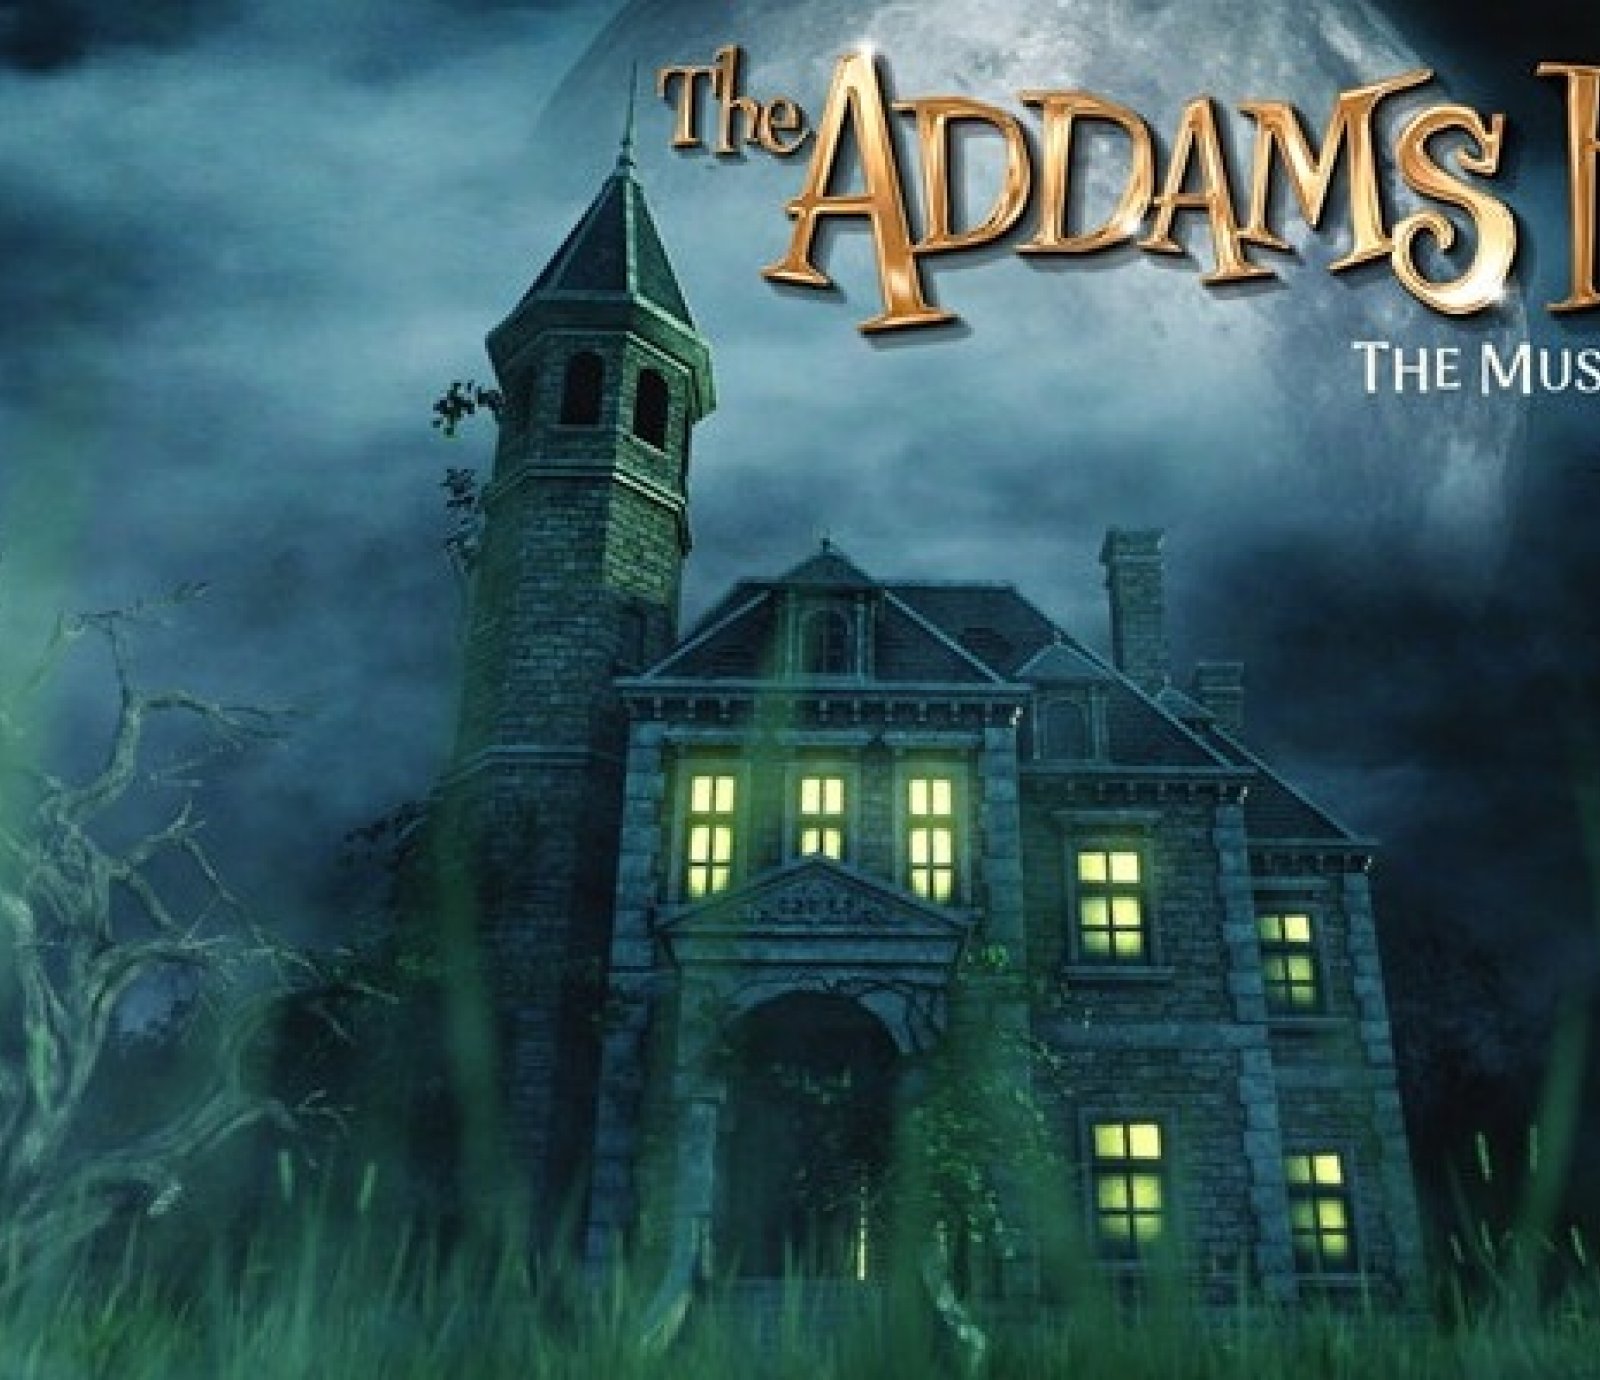 ADDAMS FAMILY THE MUSICAL